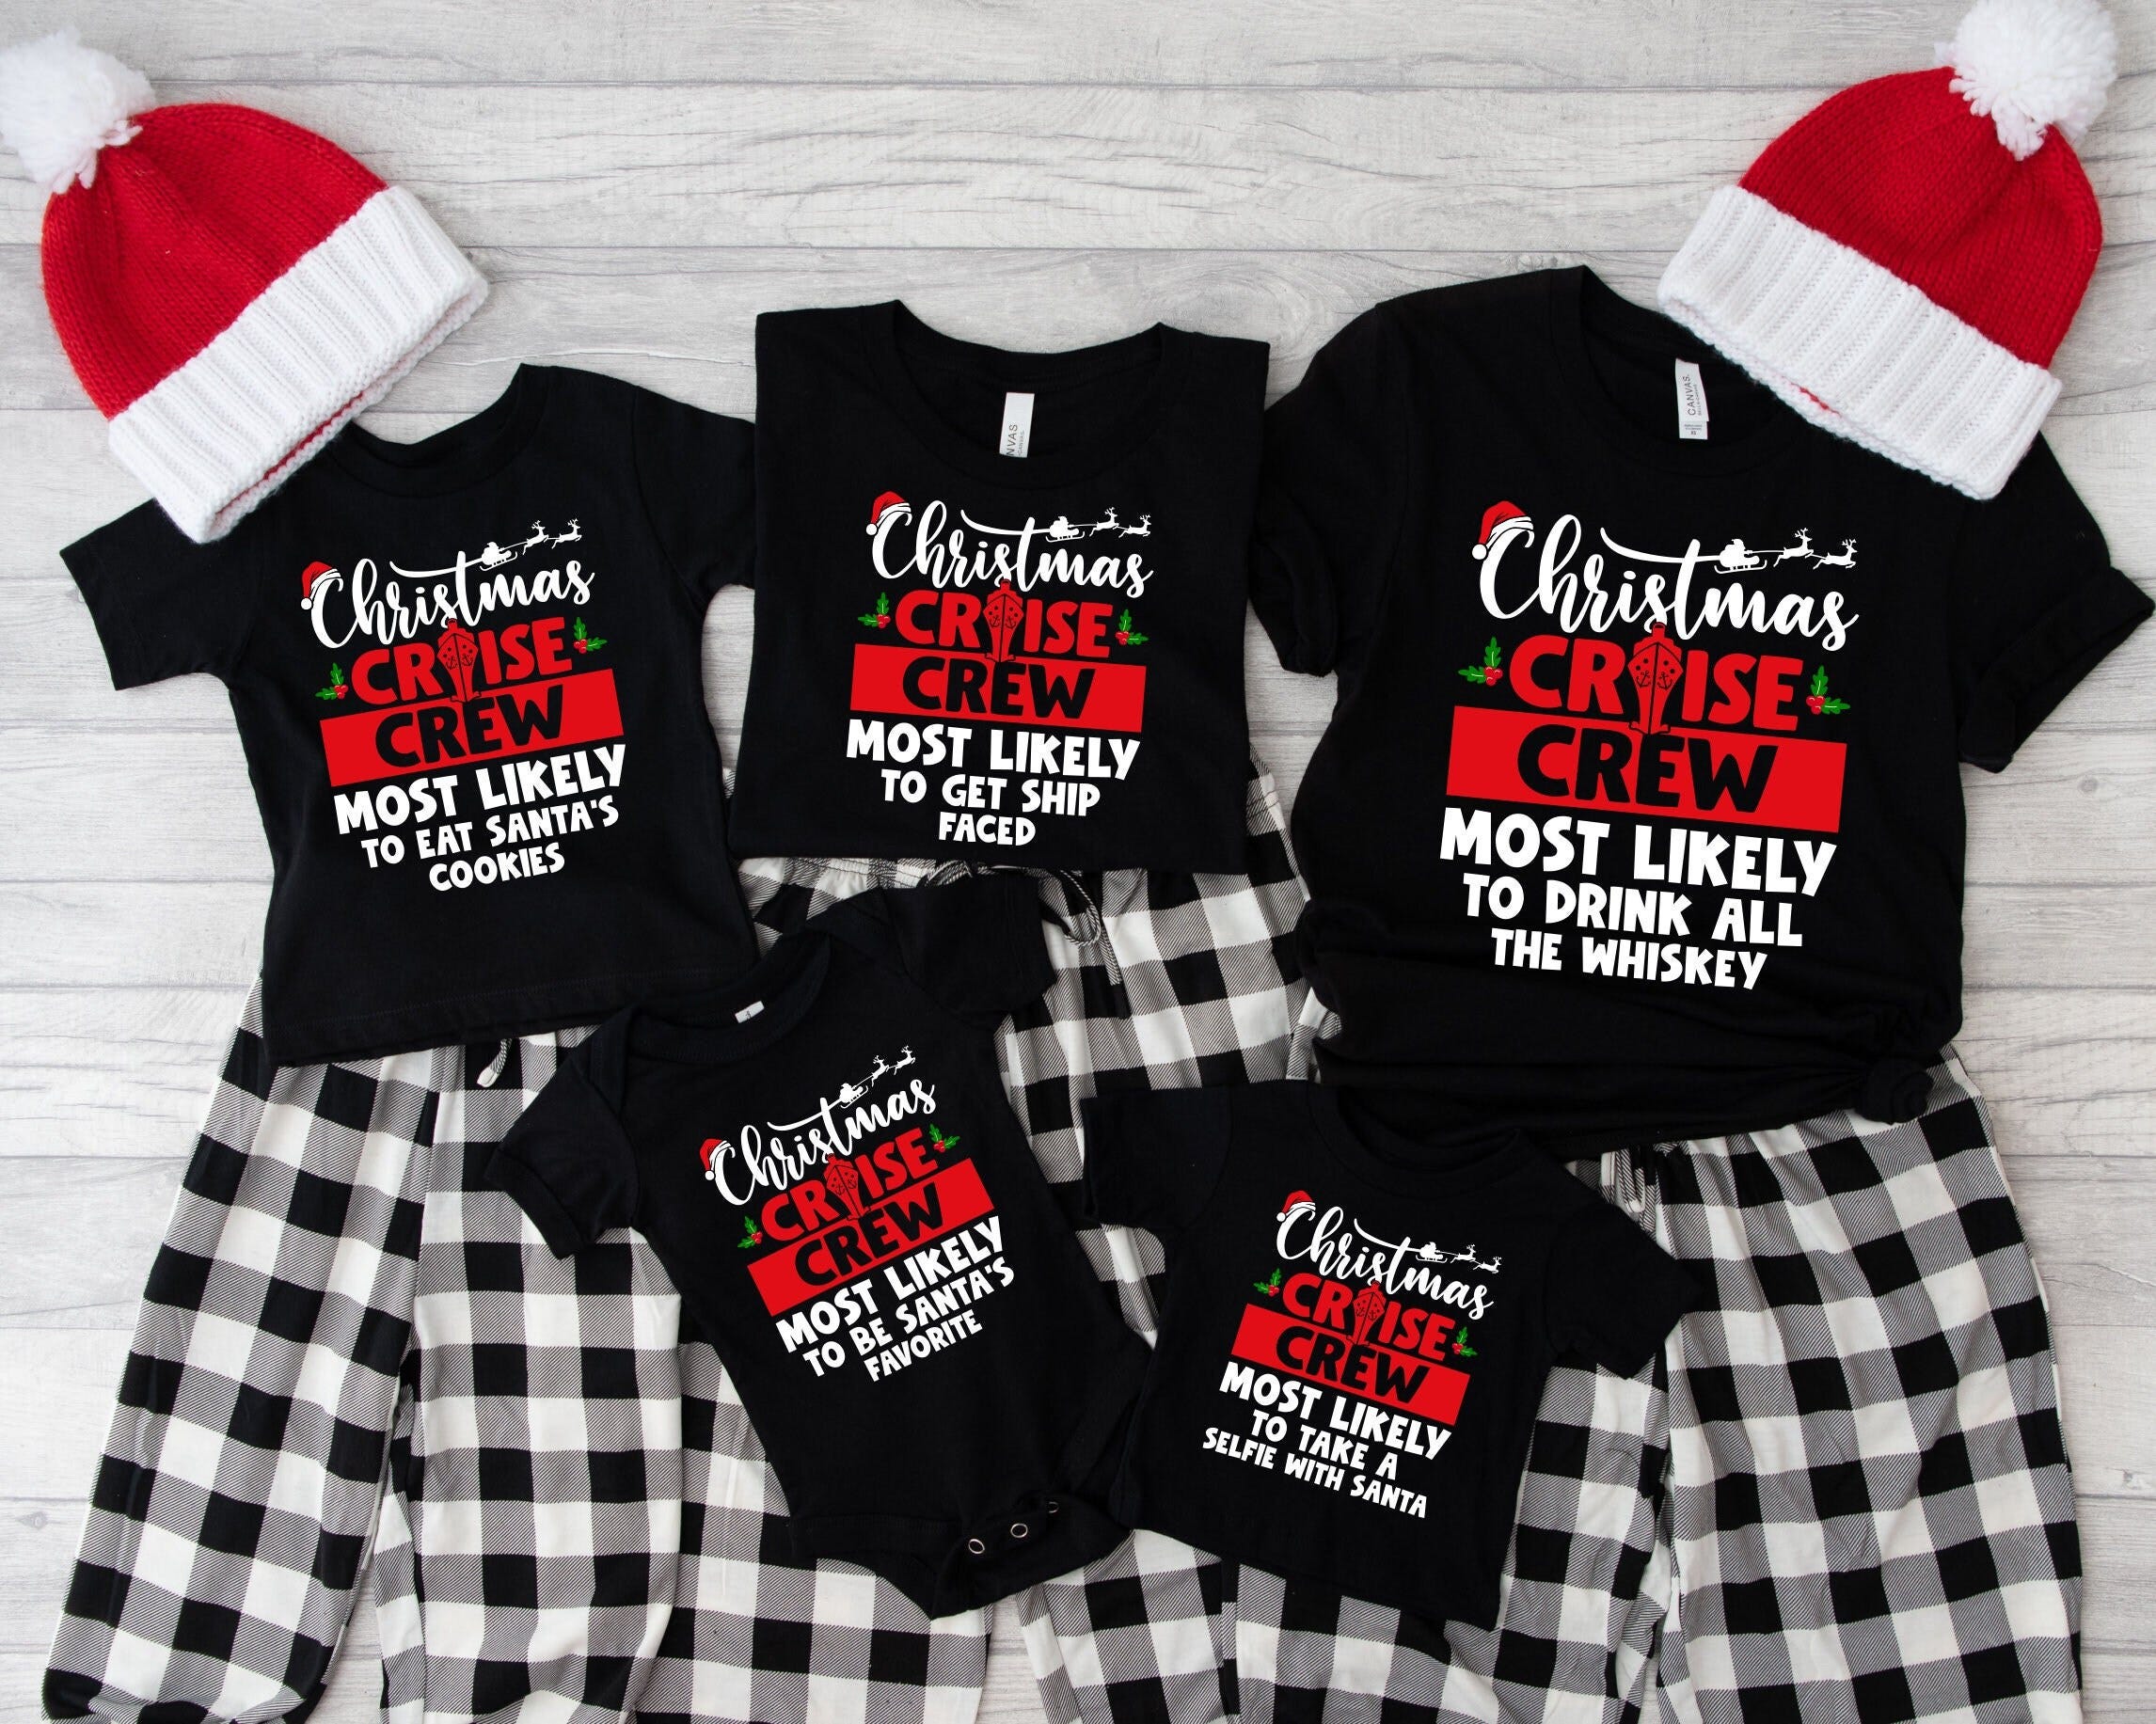 Most Likely To Christmas Cruise Crew Shirts,Most Likely Cruise Shirt,Christmas Cruise Tee,Family Cruise Shirt,Christmas Gift,Holiday Shirts